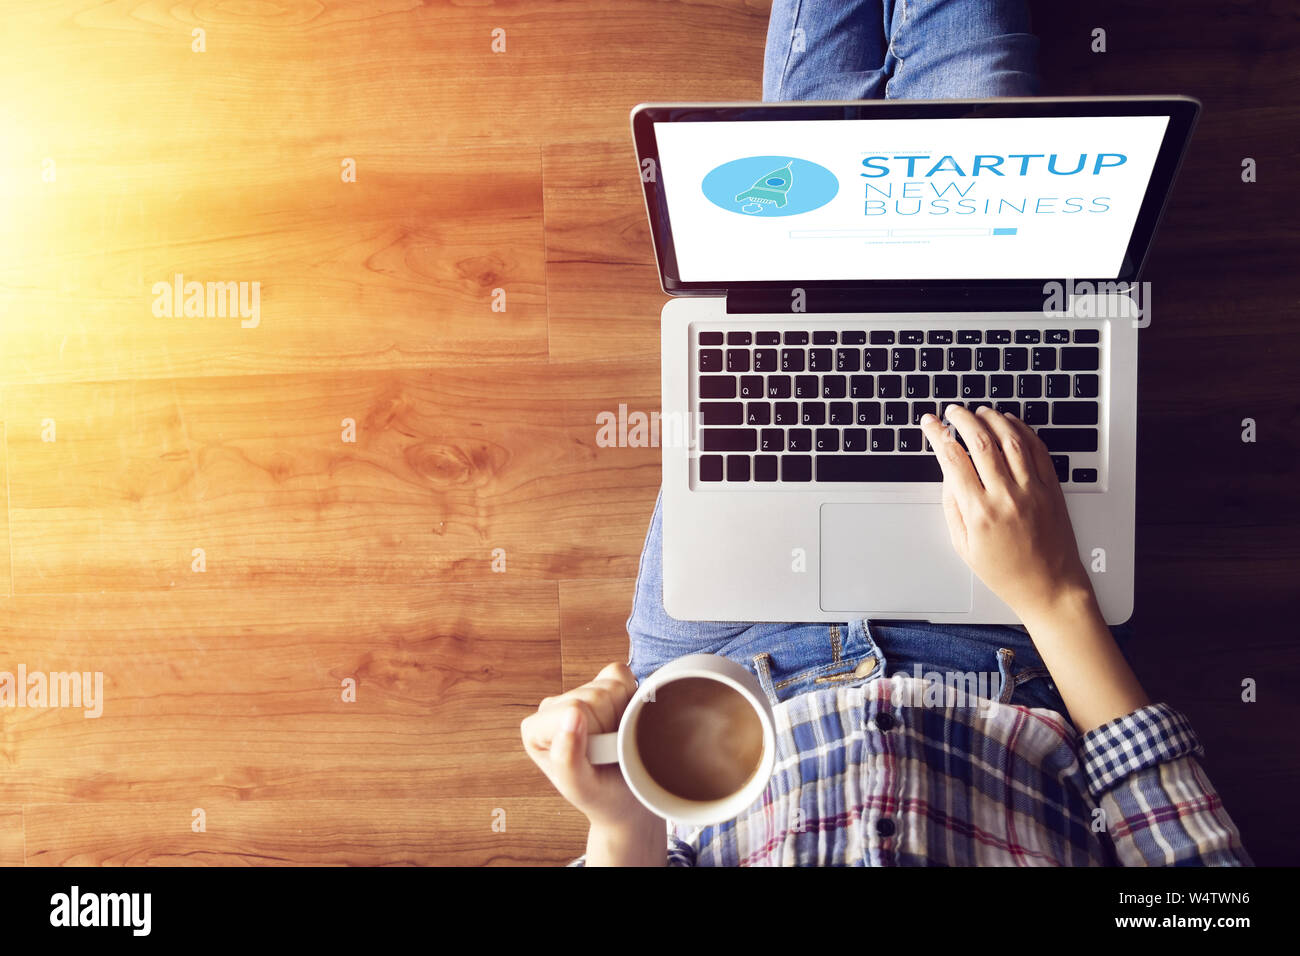 top view of people working on notebook laptop computer from home on wooden floor with startup business and rocket logo on screen, start up ideas busin Stock Photo